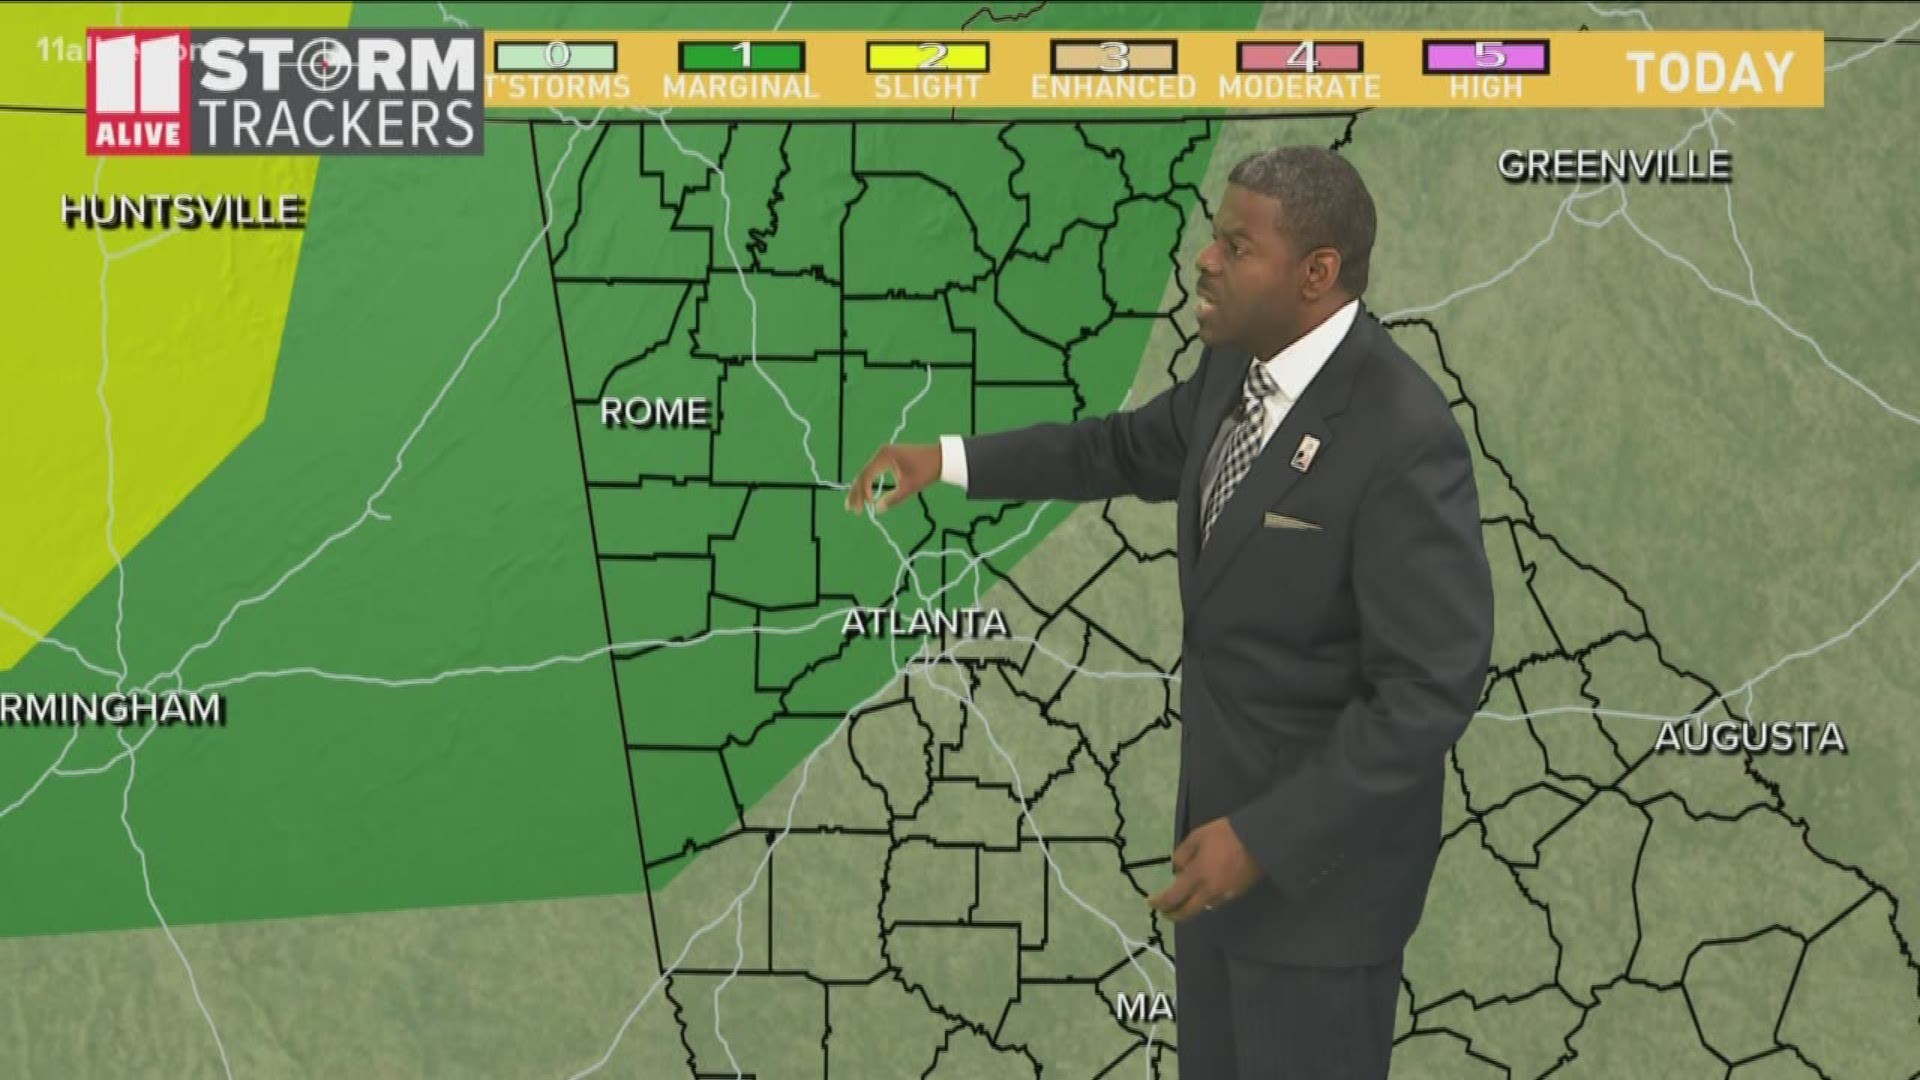 Scattered instances of severe weather could continue in the Atlanta area this week.